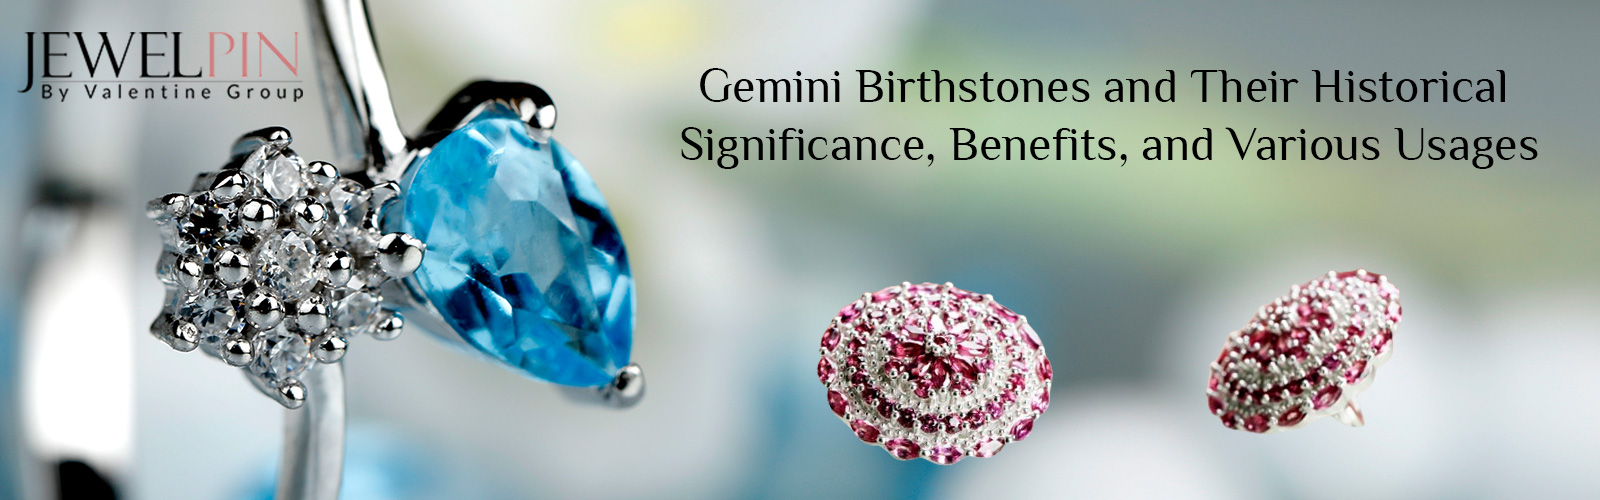 Gemini Birthstones and Their Historical Significance Benefits and Various Usages